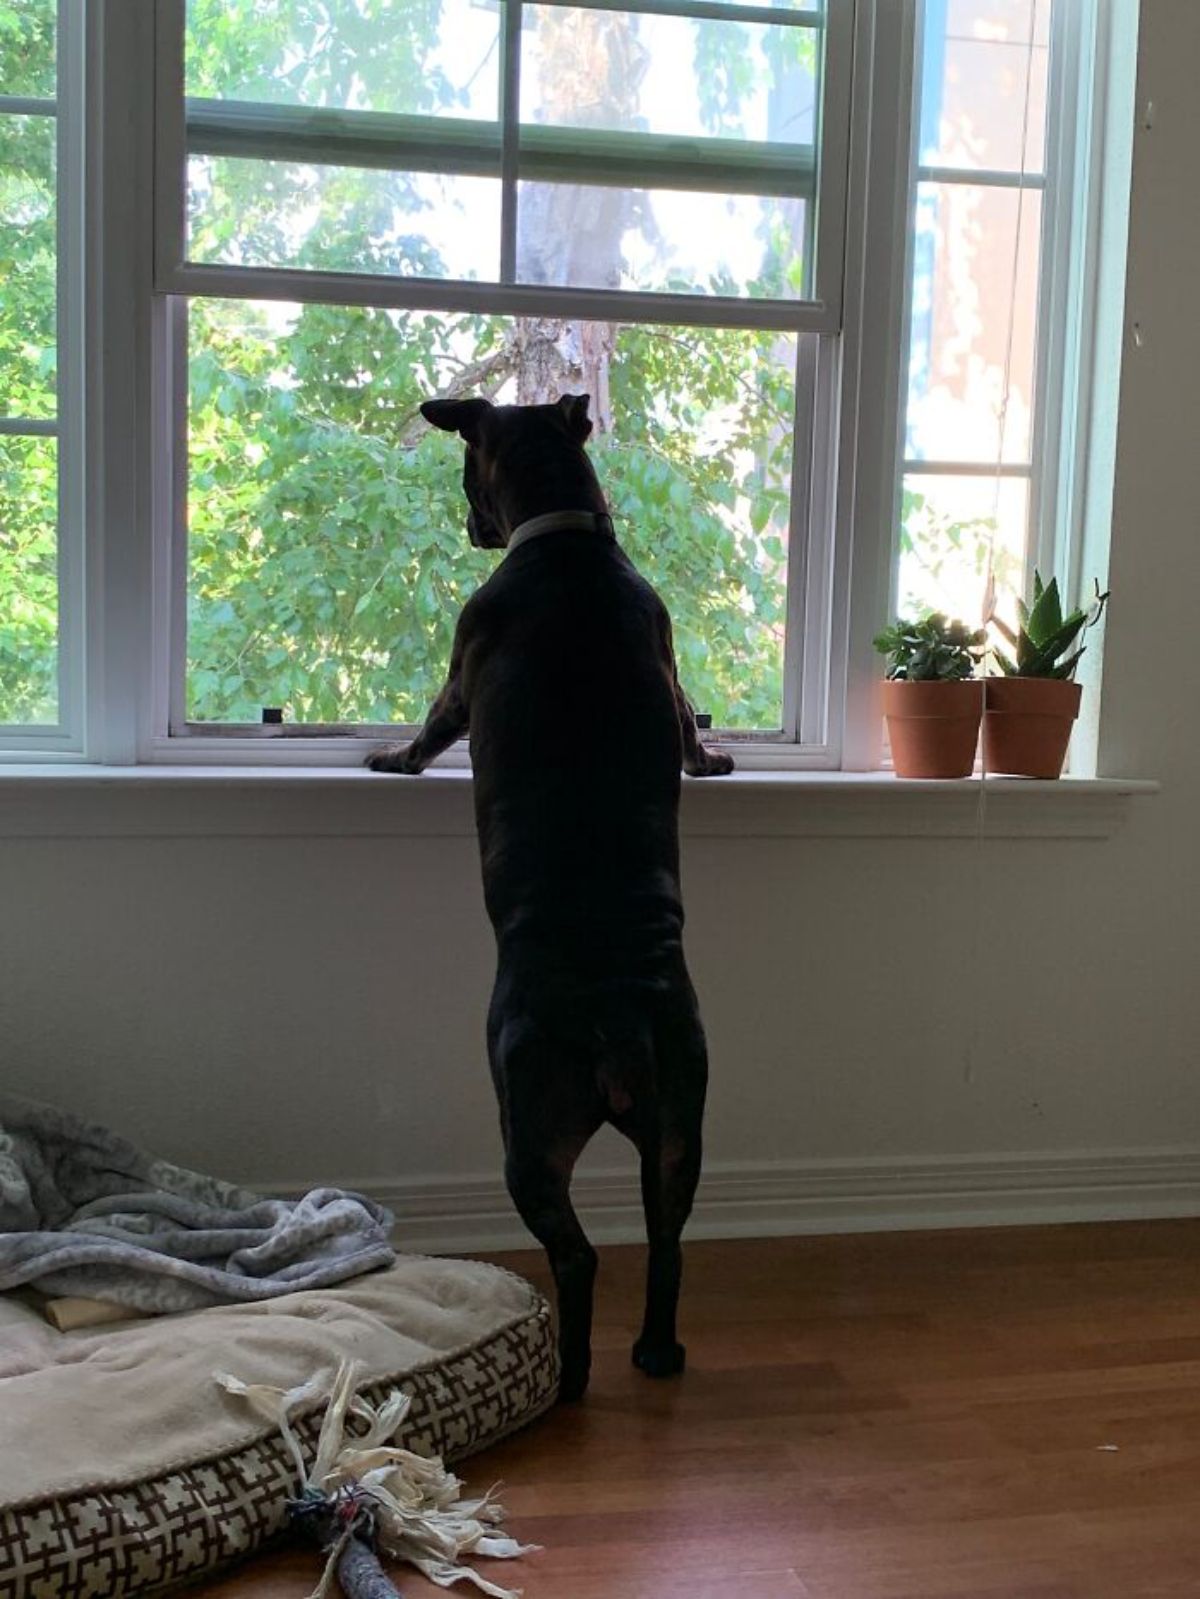 black dog standing on hind legs with front paws on a ledge looking out of a window